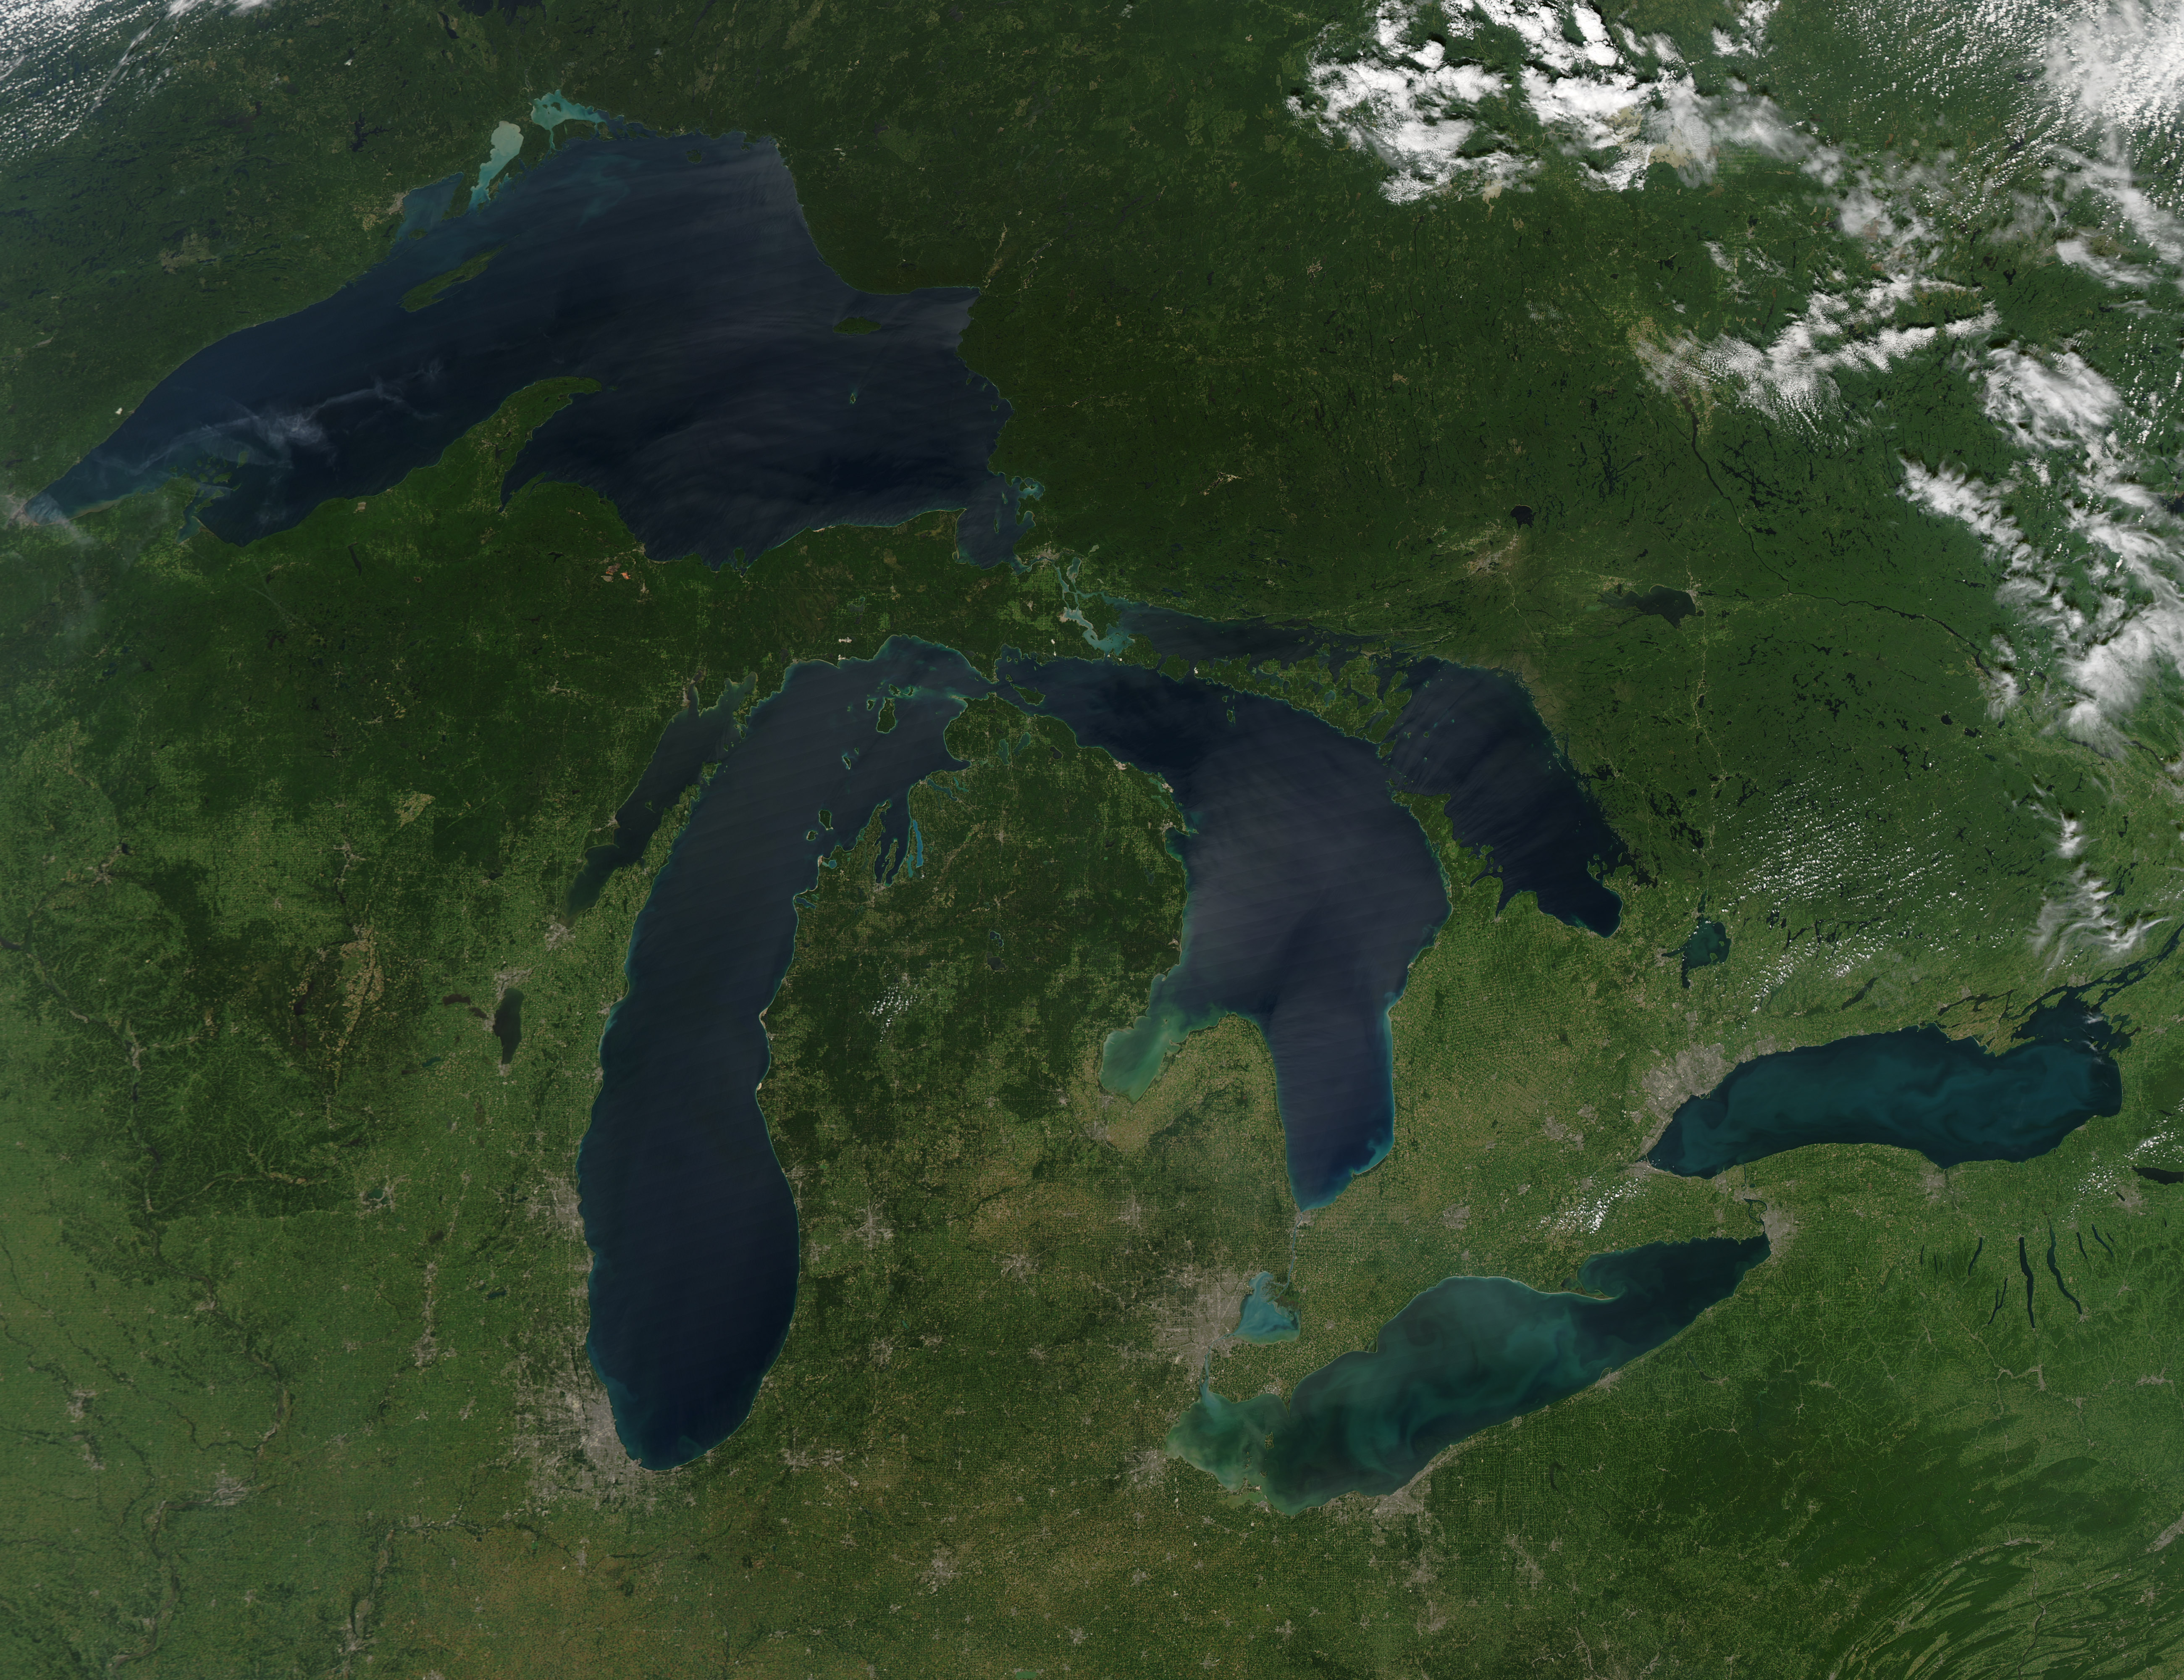 Great Lakes, No Clouds - related image preview